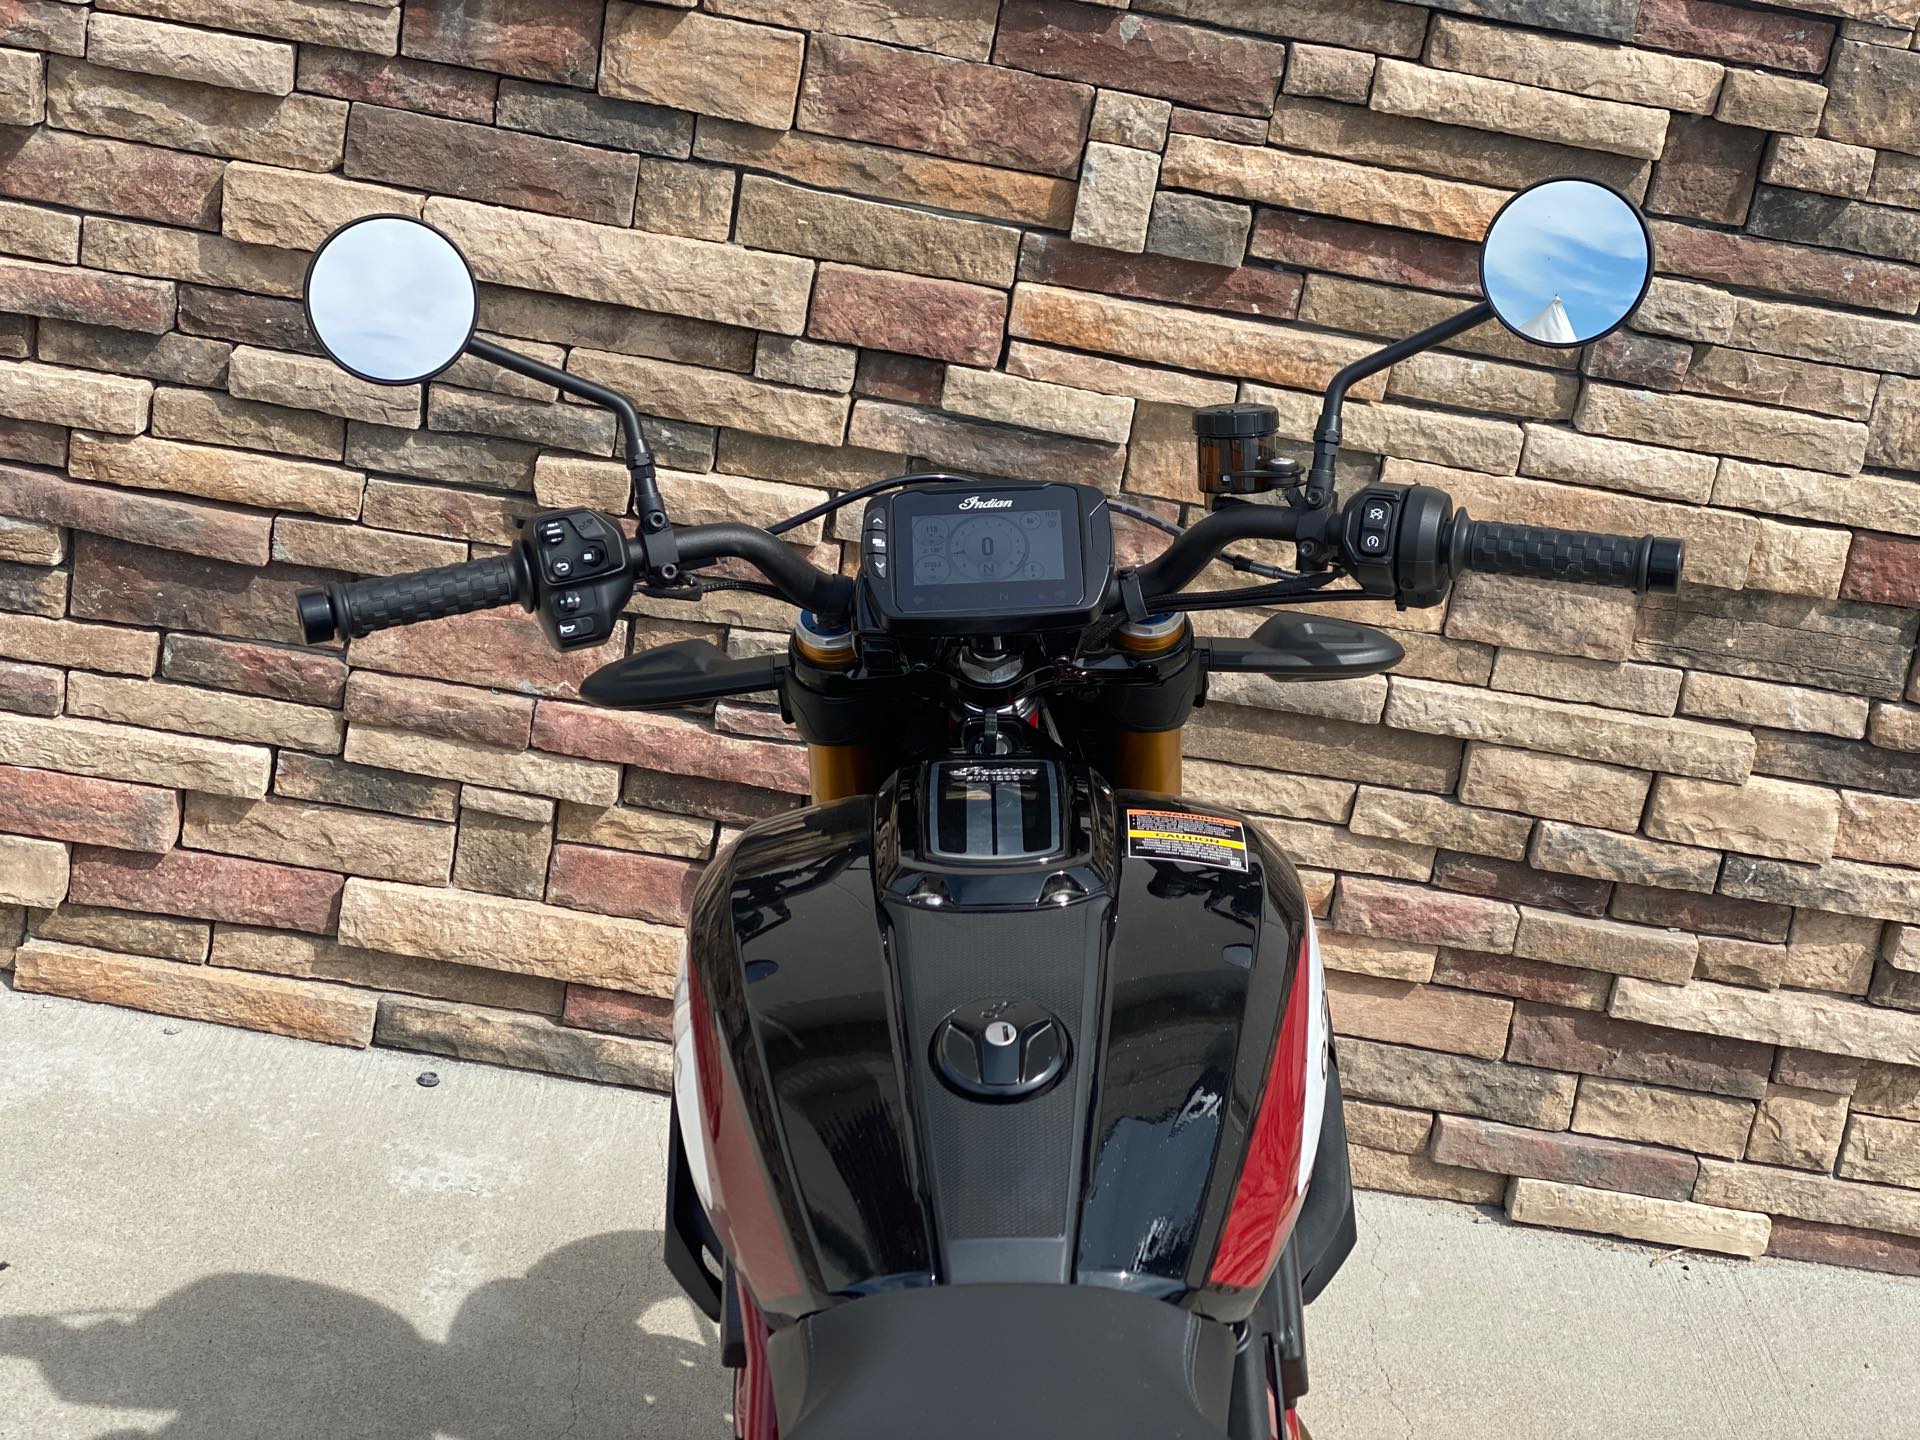 2019 Indian FTR 1200 S at Head Indian Motorcycle